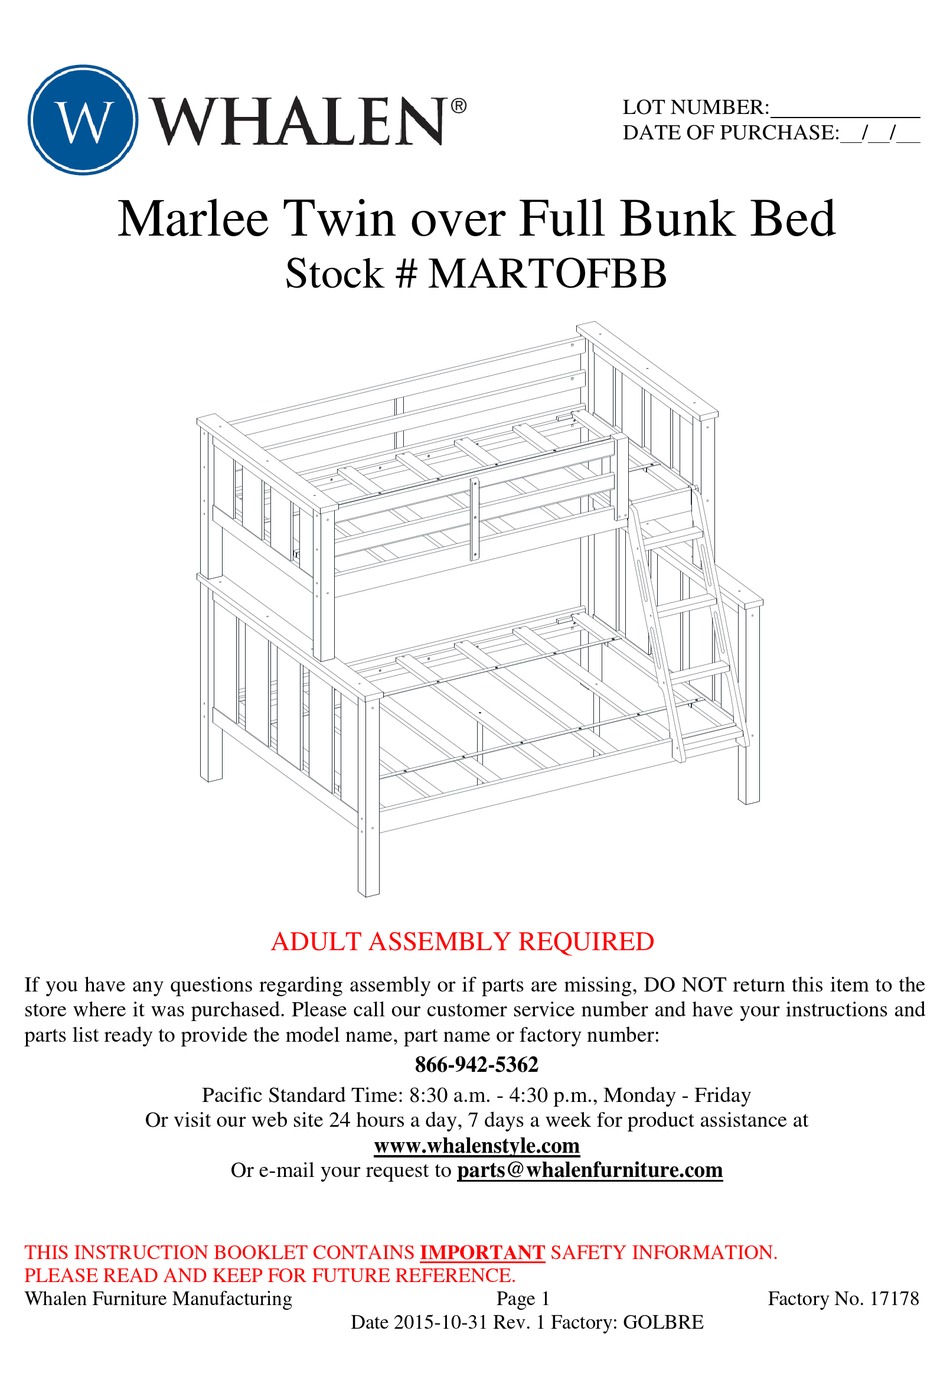 Whalen Marlee Twin Over Full Bunk Bed, Mainstays Bunk Bed Manual